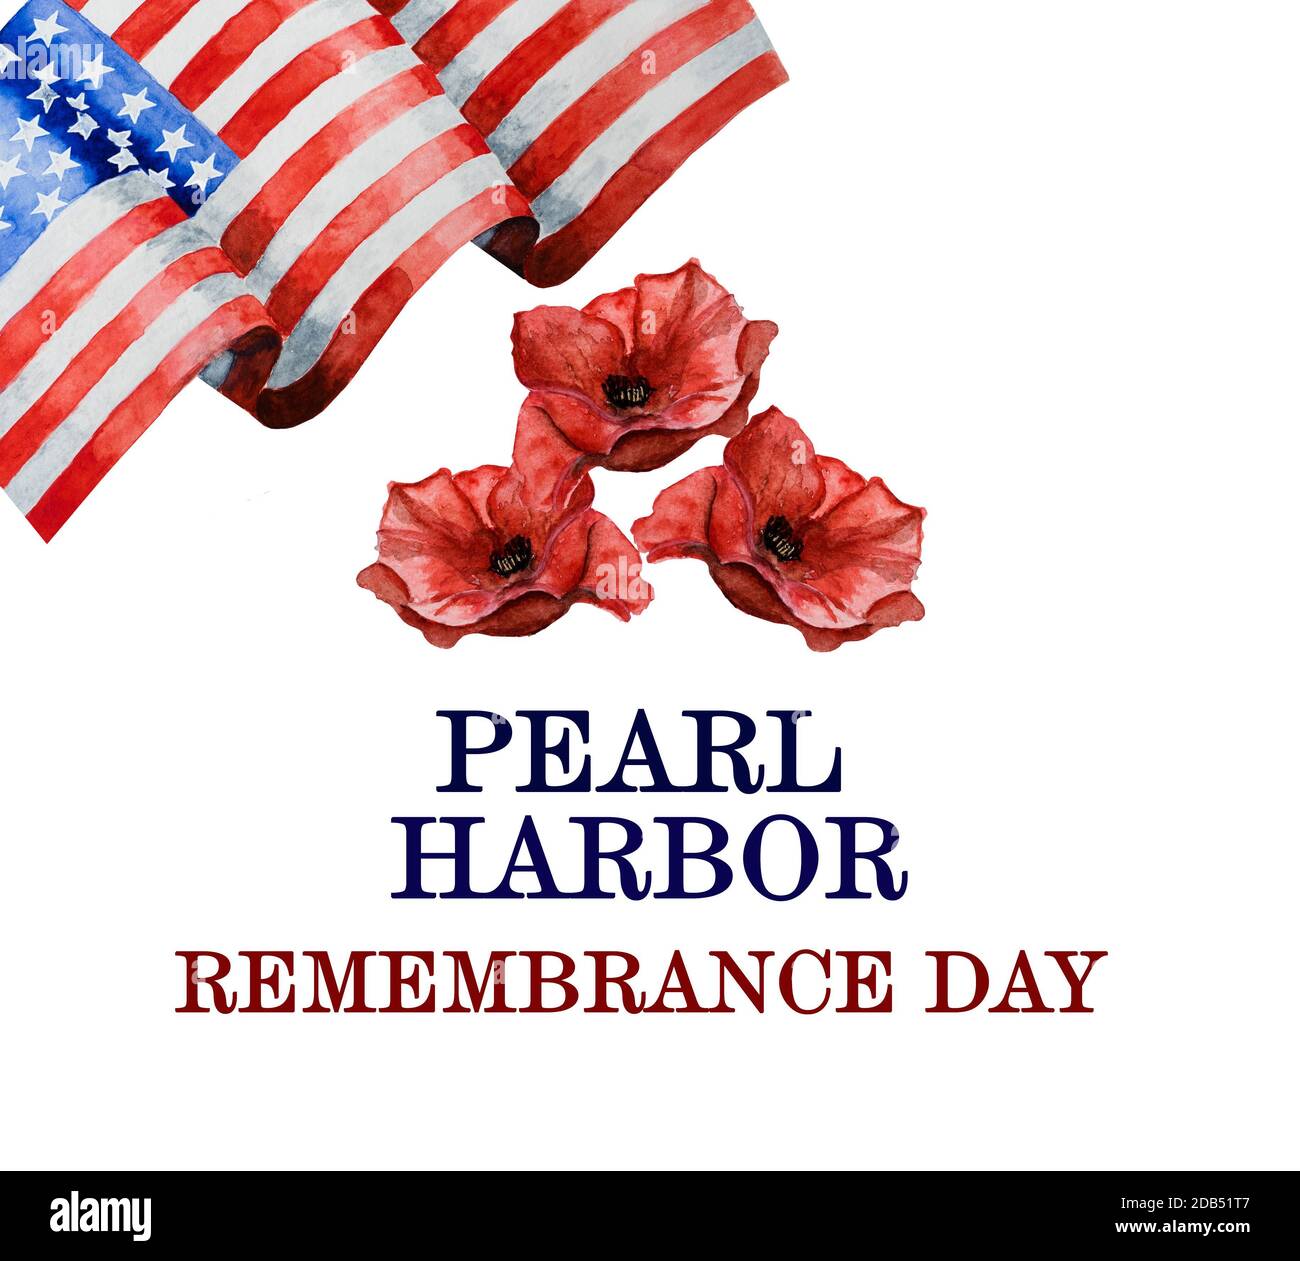 pearl harbor remembrance day pictures